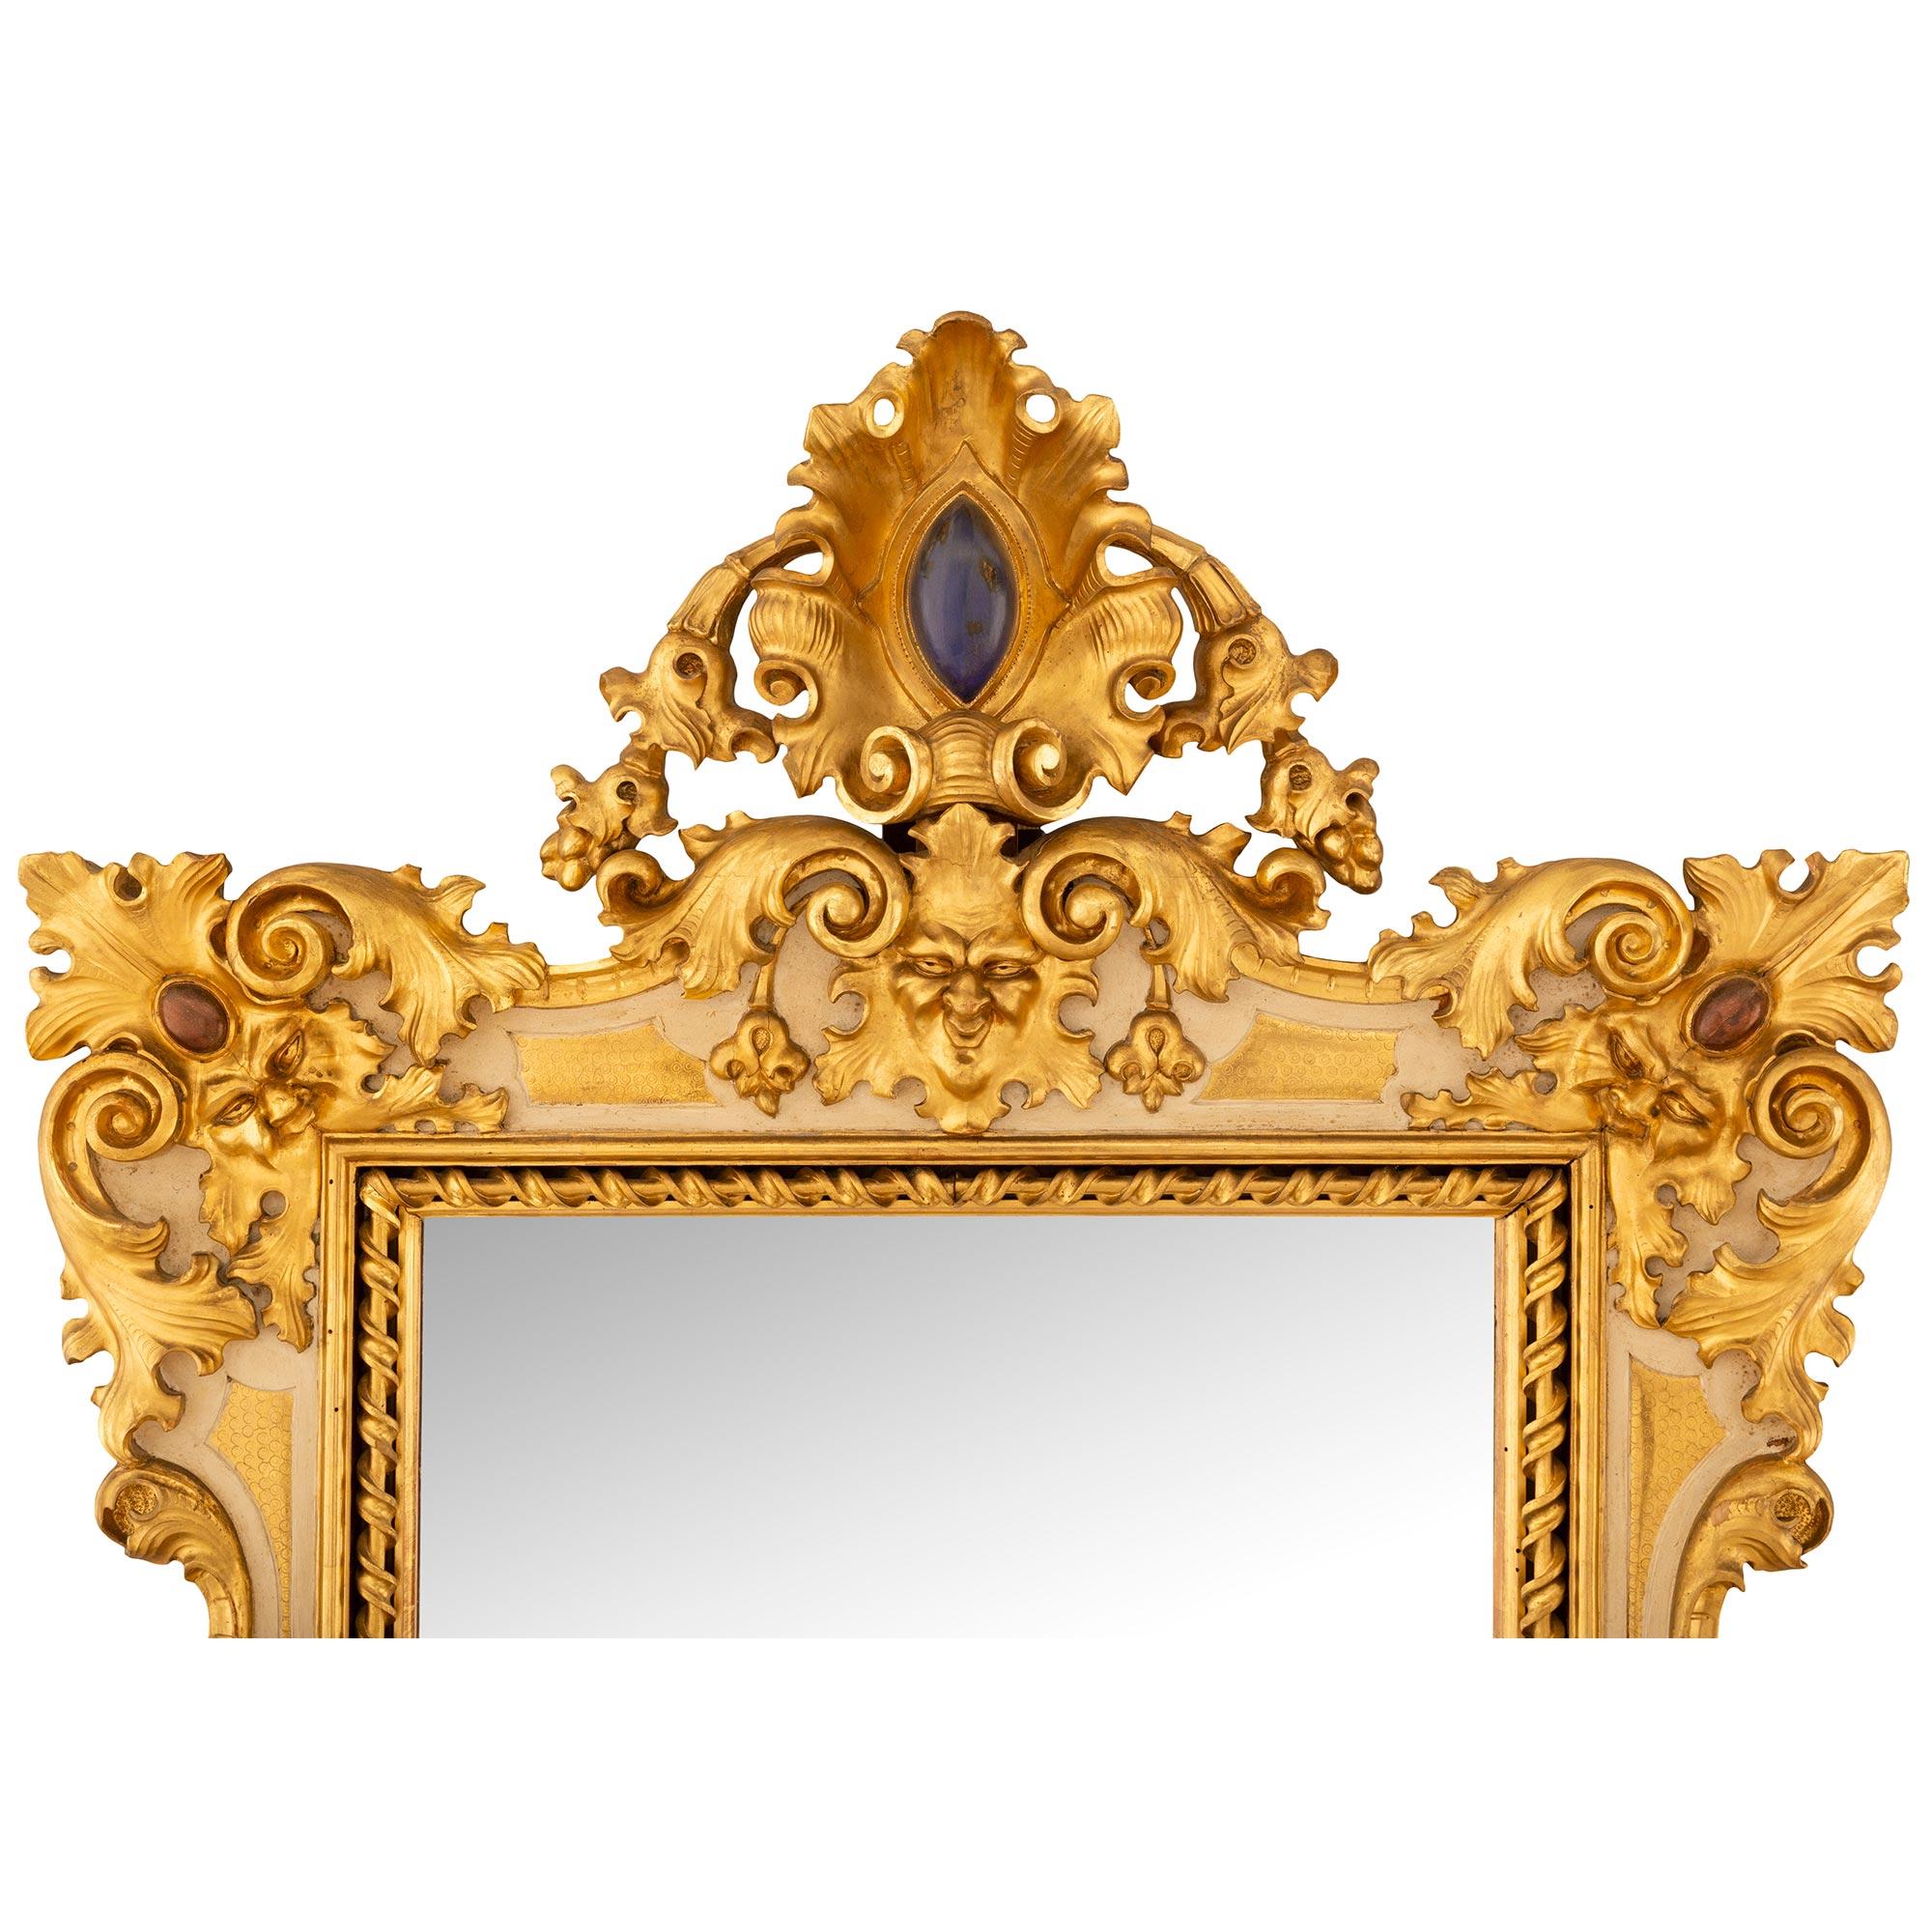 A most decorative and unique Italian 19th century Baroque st. patinated wood and Giltwood mirror. The mirror is raised on wonderful mottled feet below scrolled movements joined by a beautiful Giltwood band. The stunning mirror displays a most